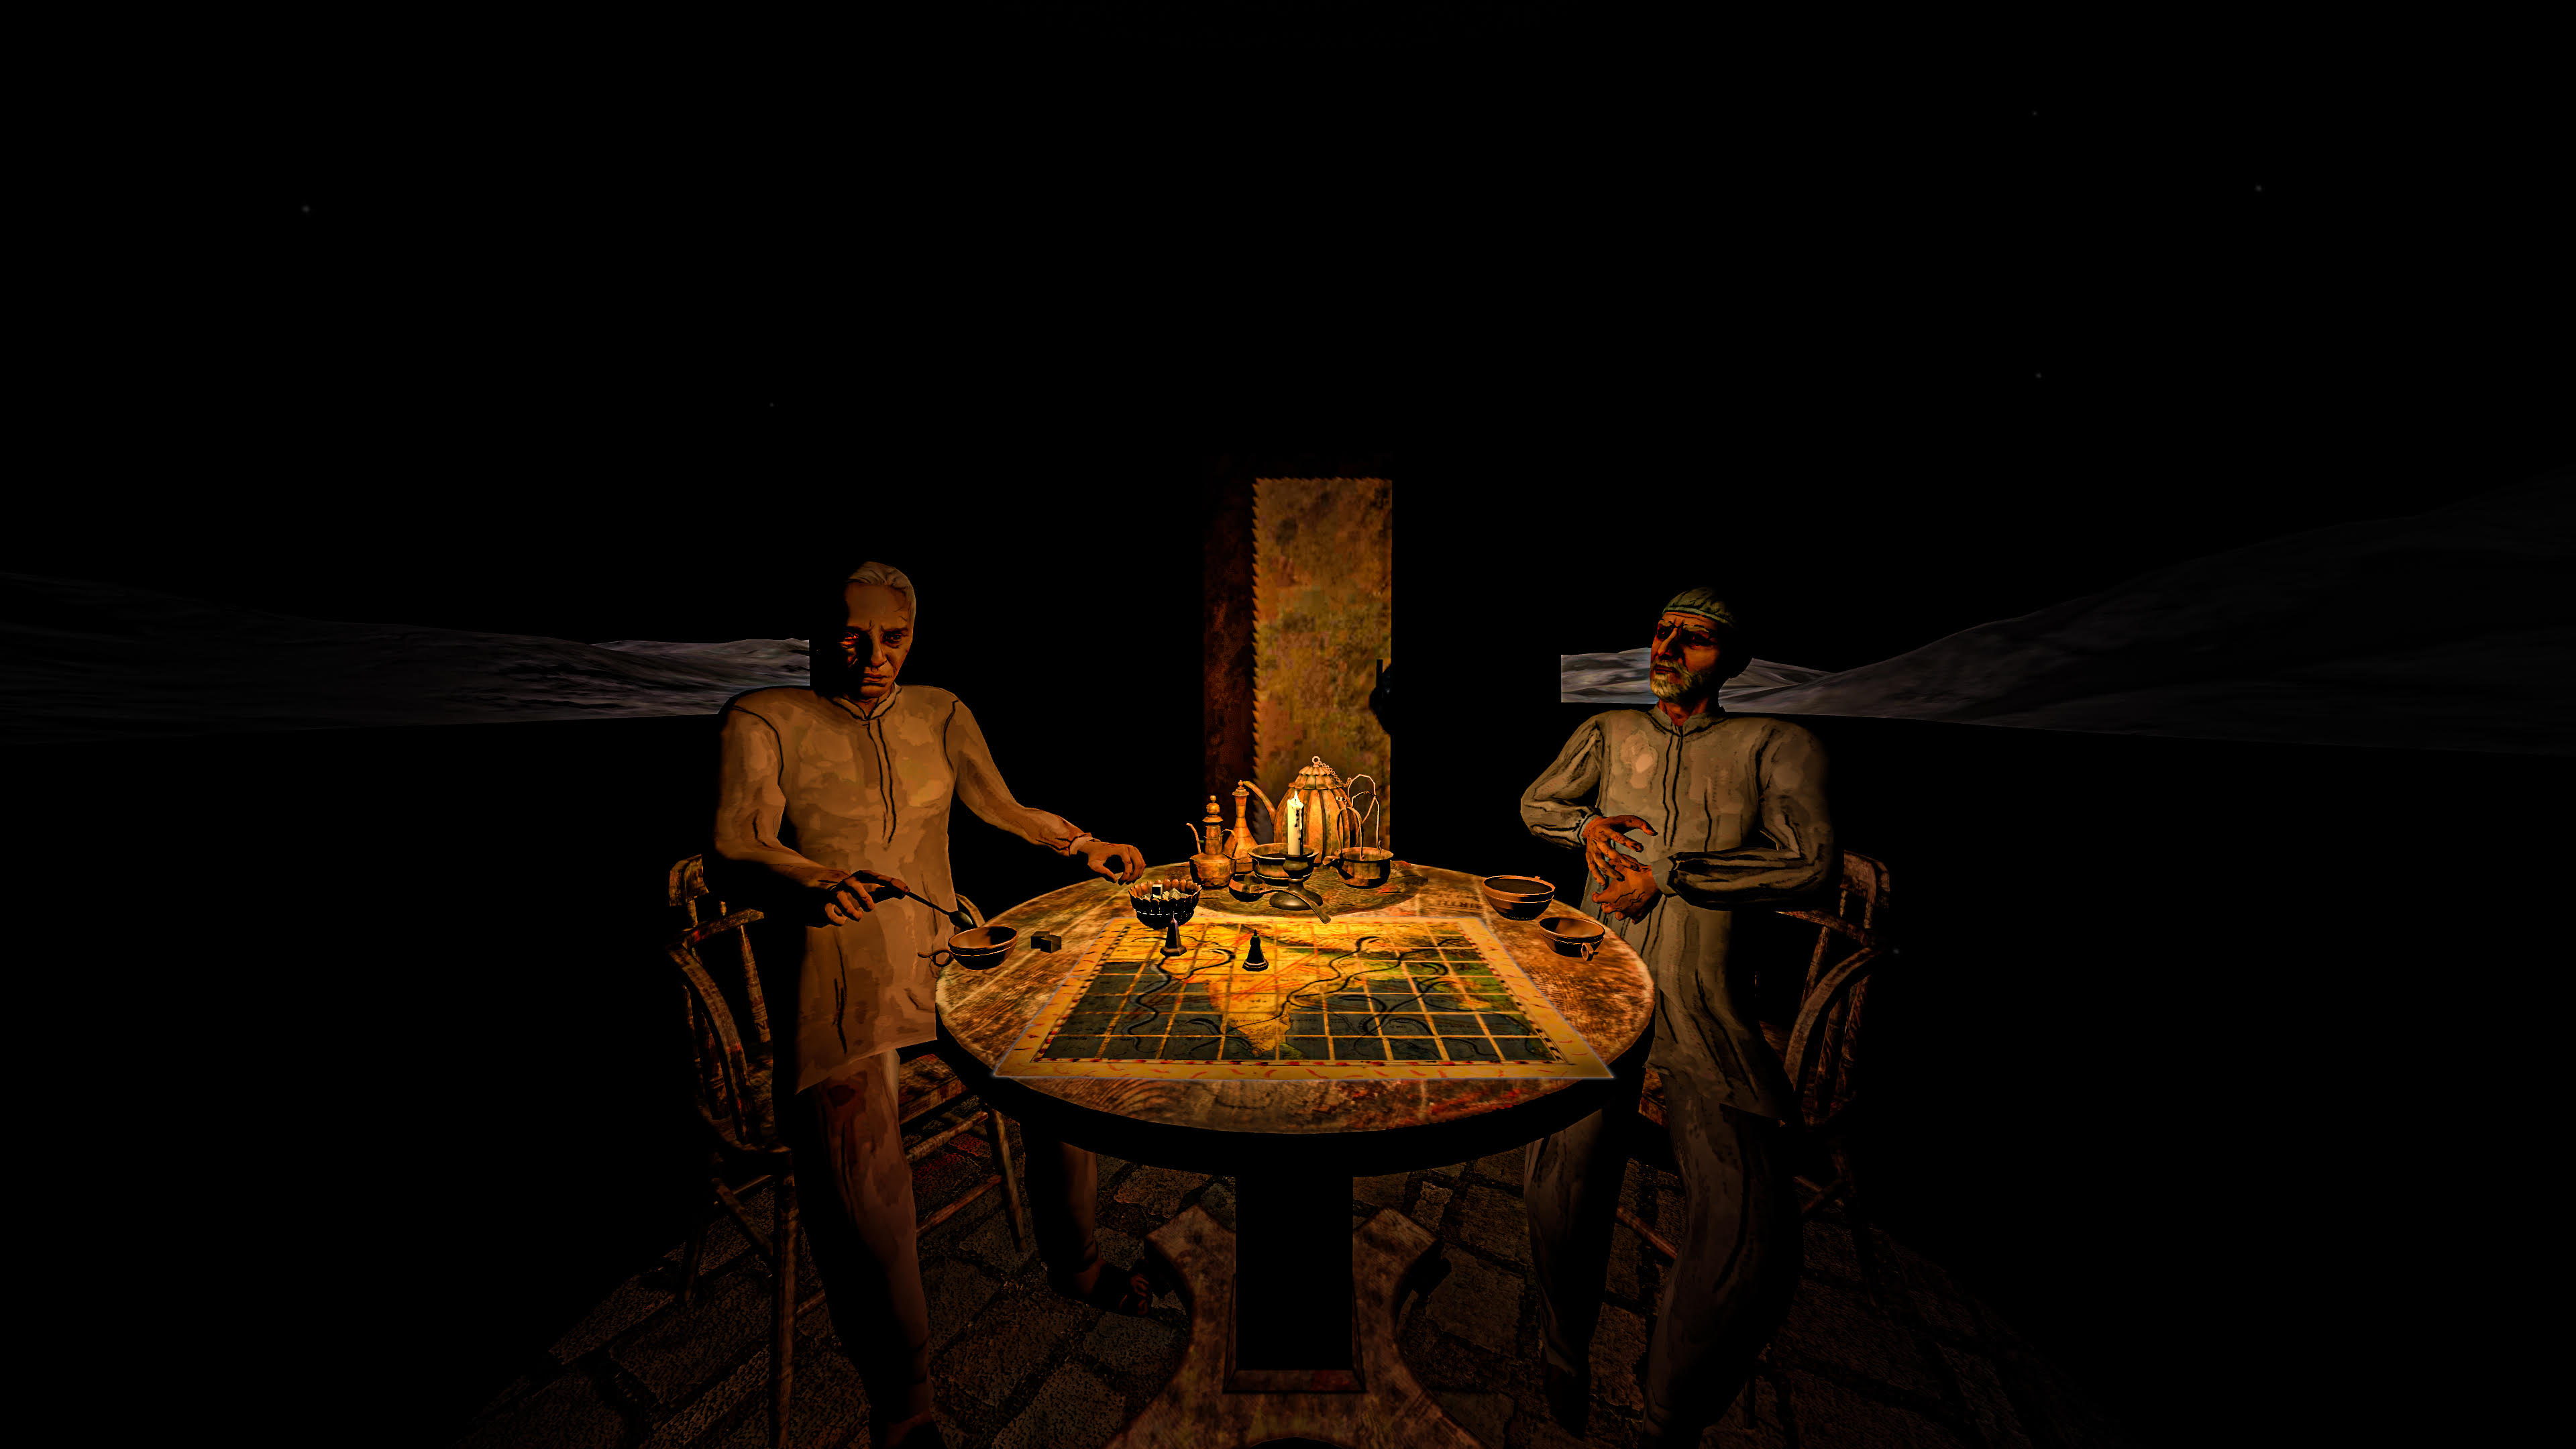 A colour graphic of two people sat at a table in a dimly candle lit room. On the table there is a map, cups and a coffee pot.